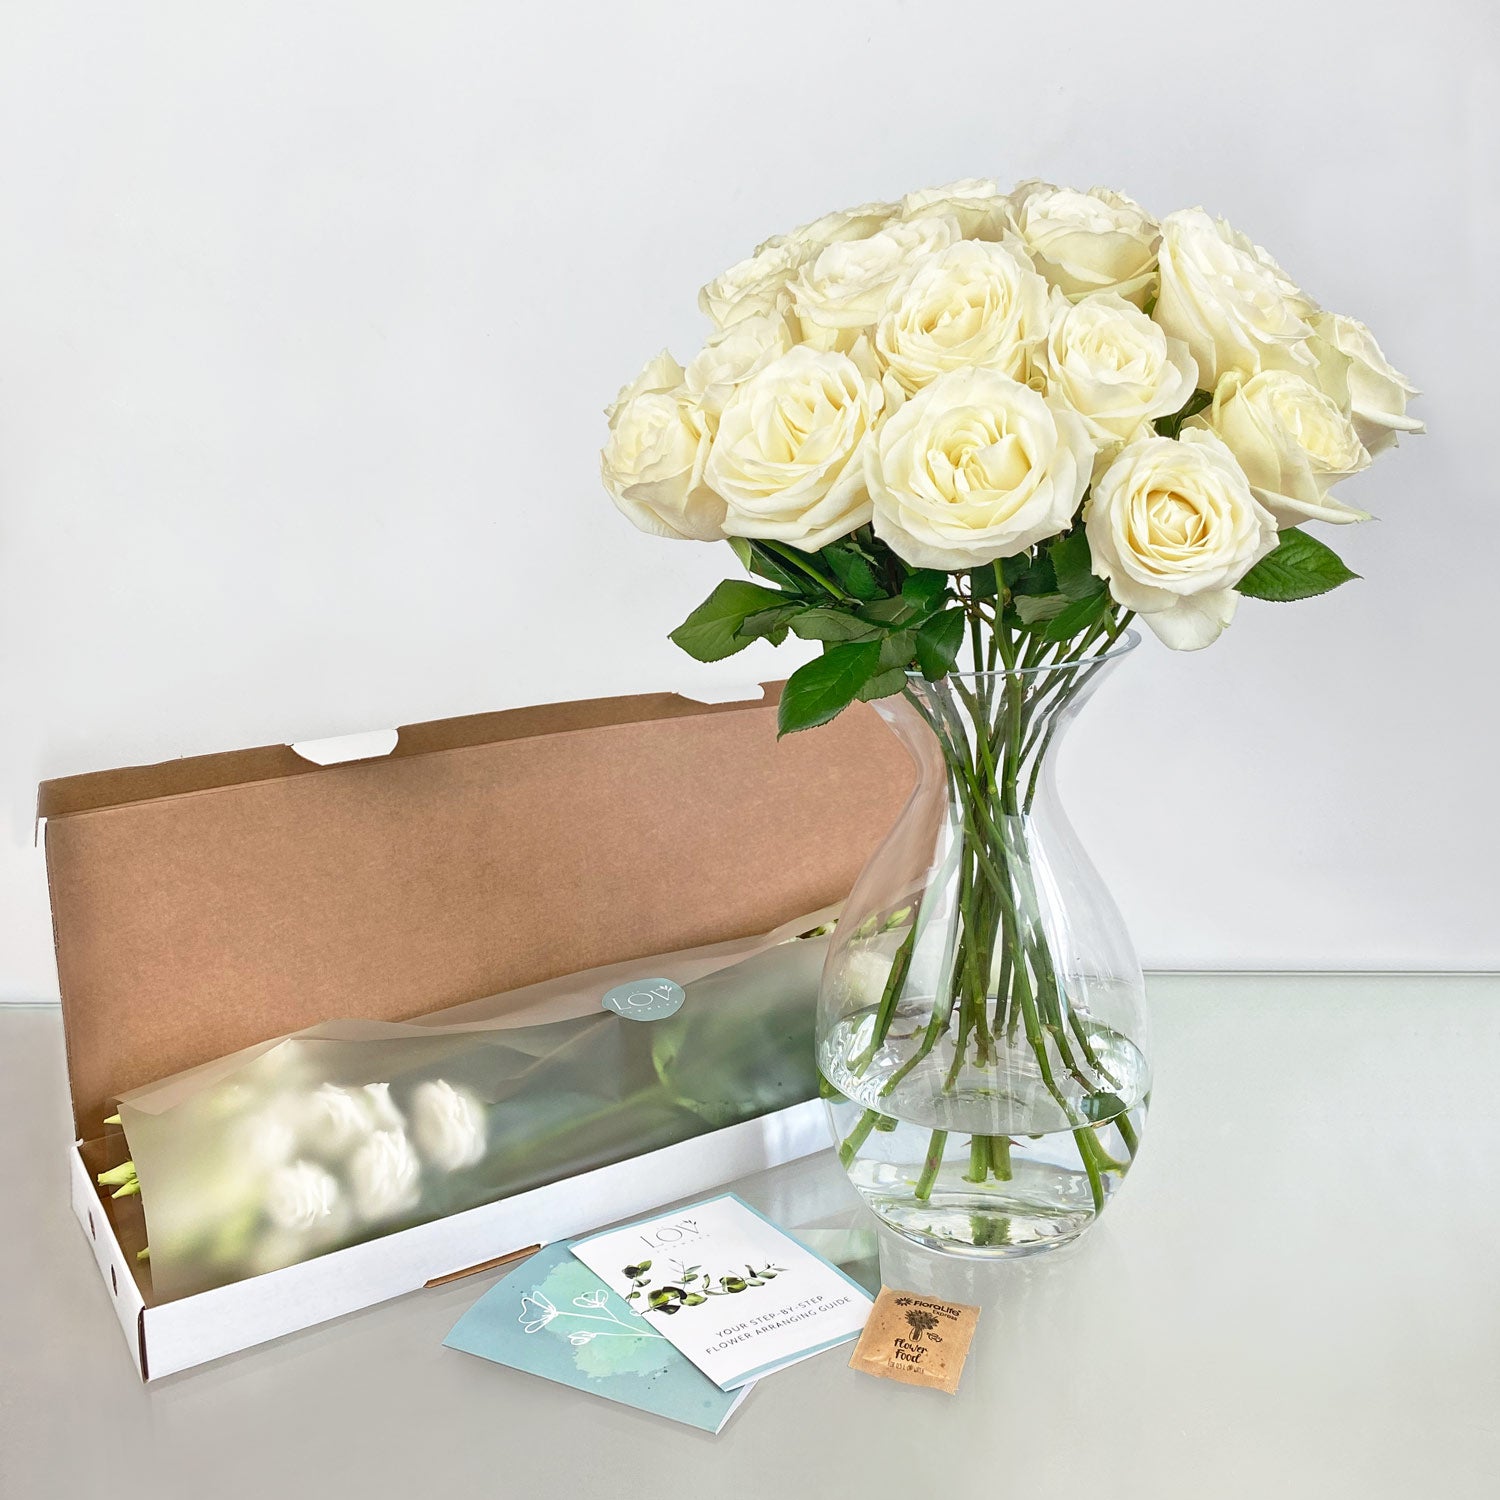 20 White Roses Bouquet, 20 Ivory Avalanche Roses